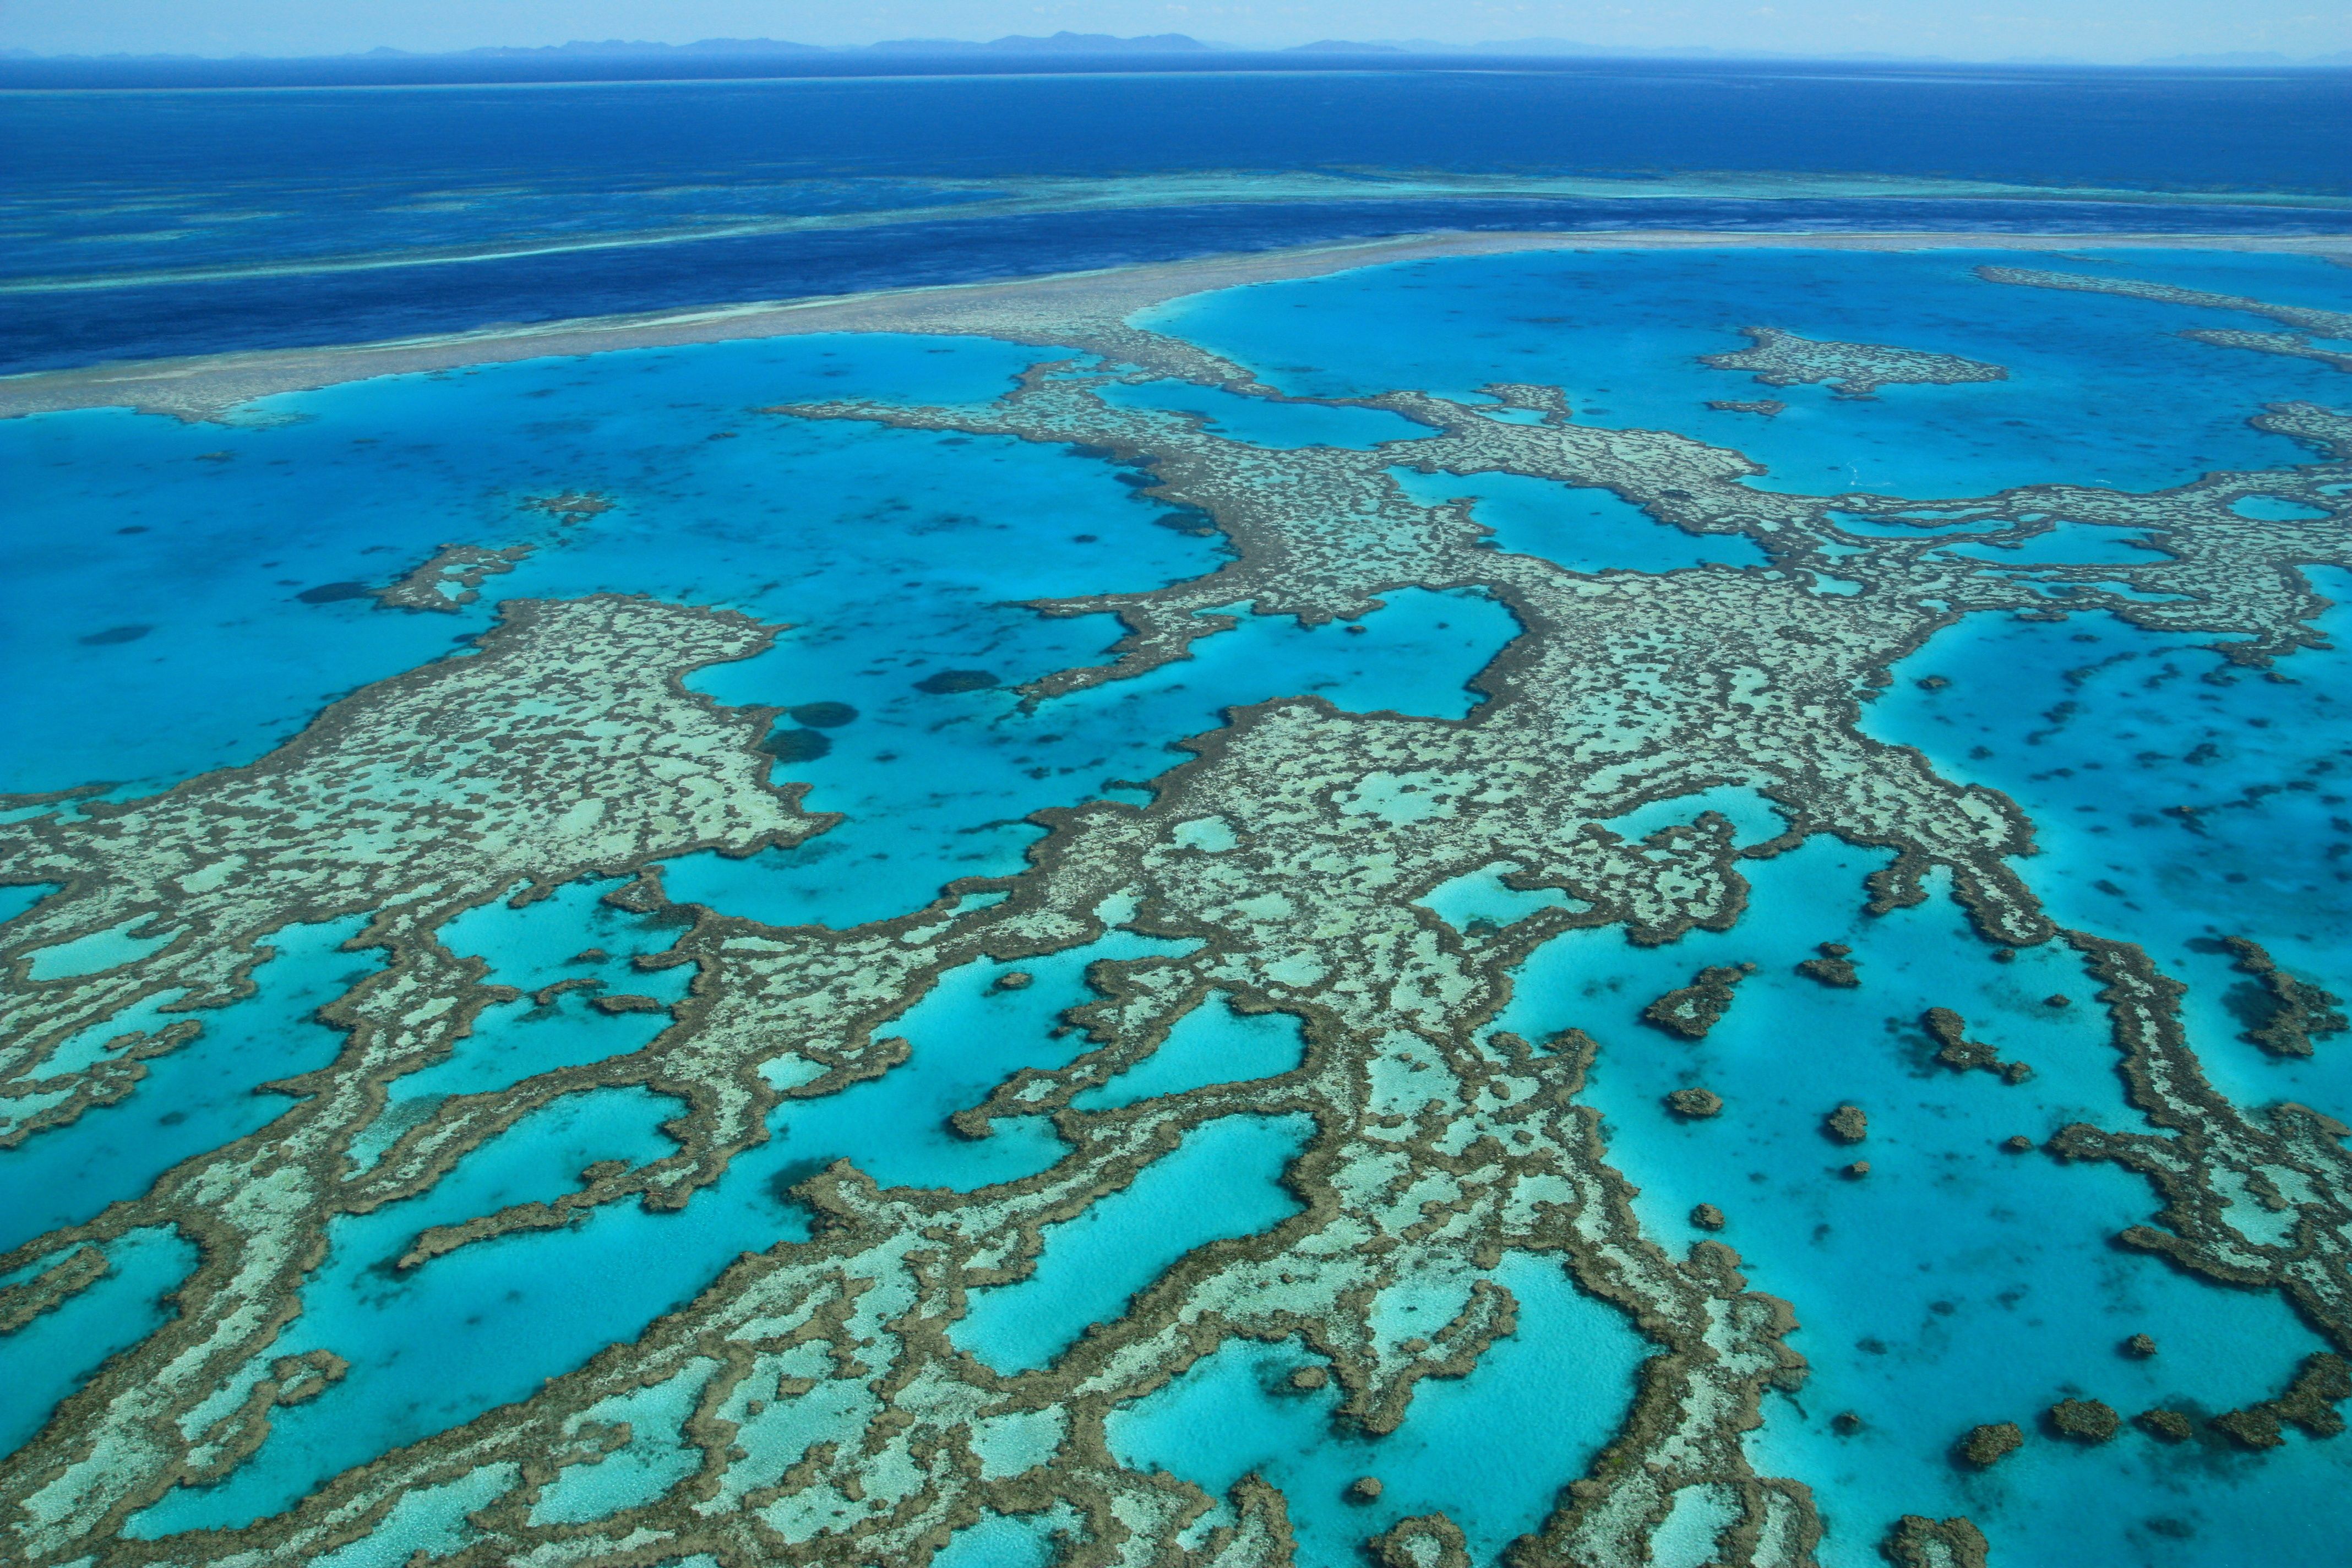 The Great Barrier Reef, accessible from Cairns Australia.